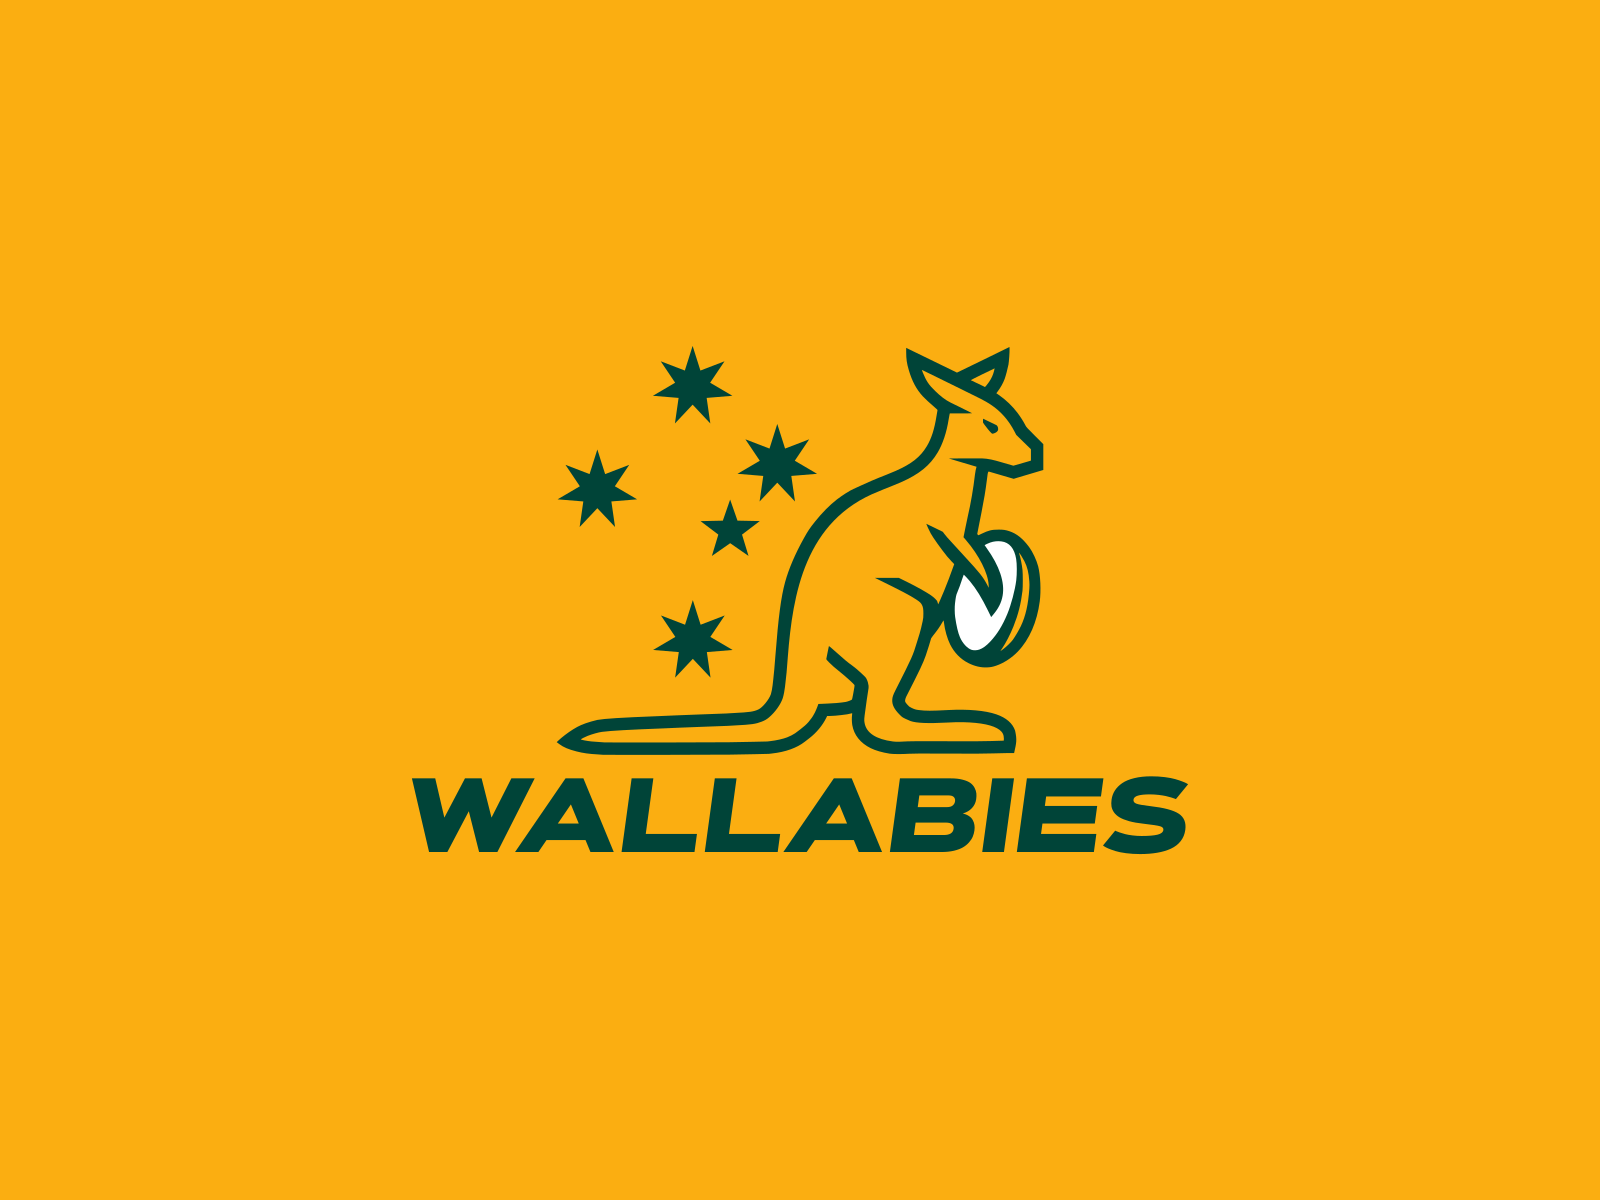 Wallabies Rugby Concept by Allister Lovelock on Dribbble